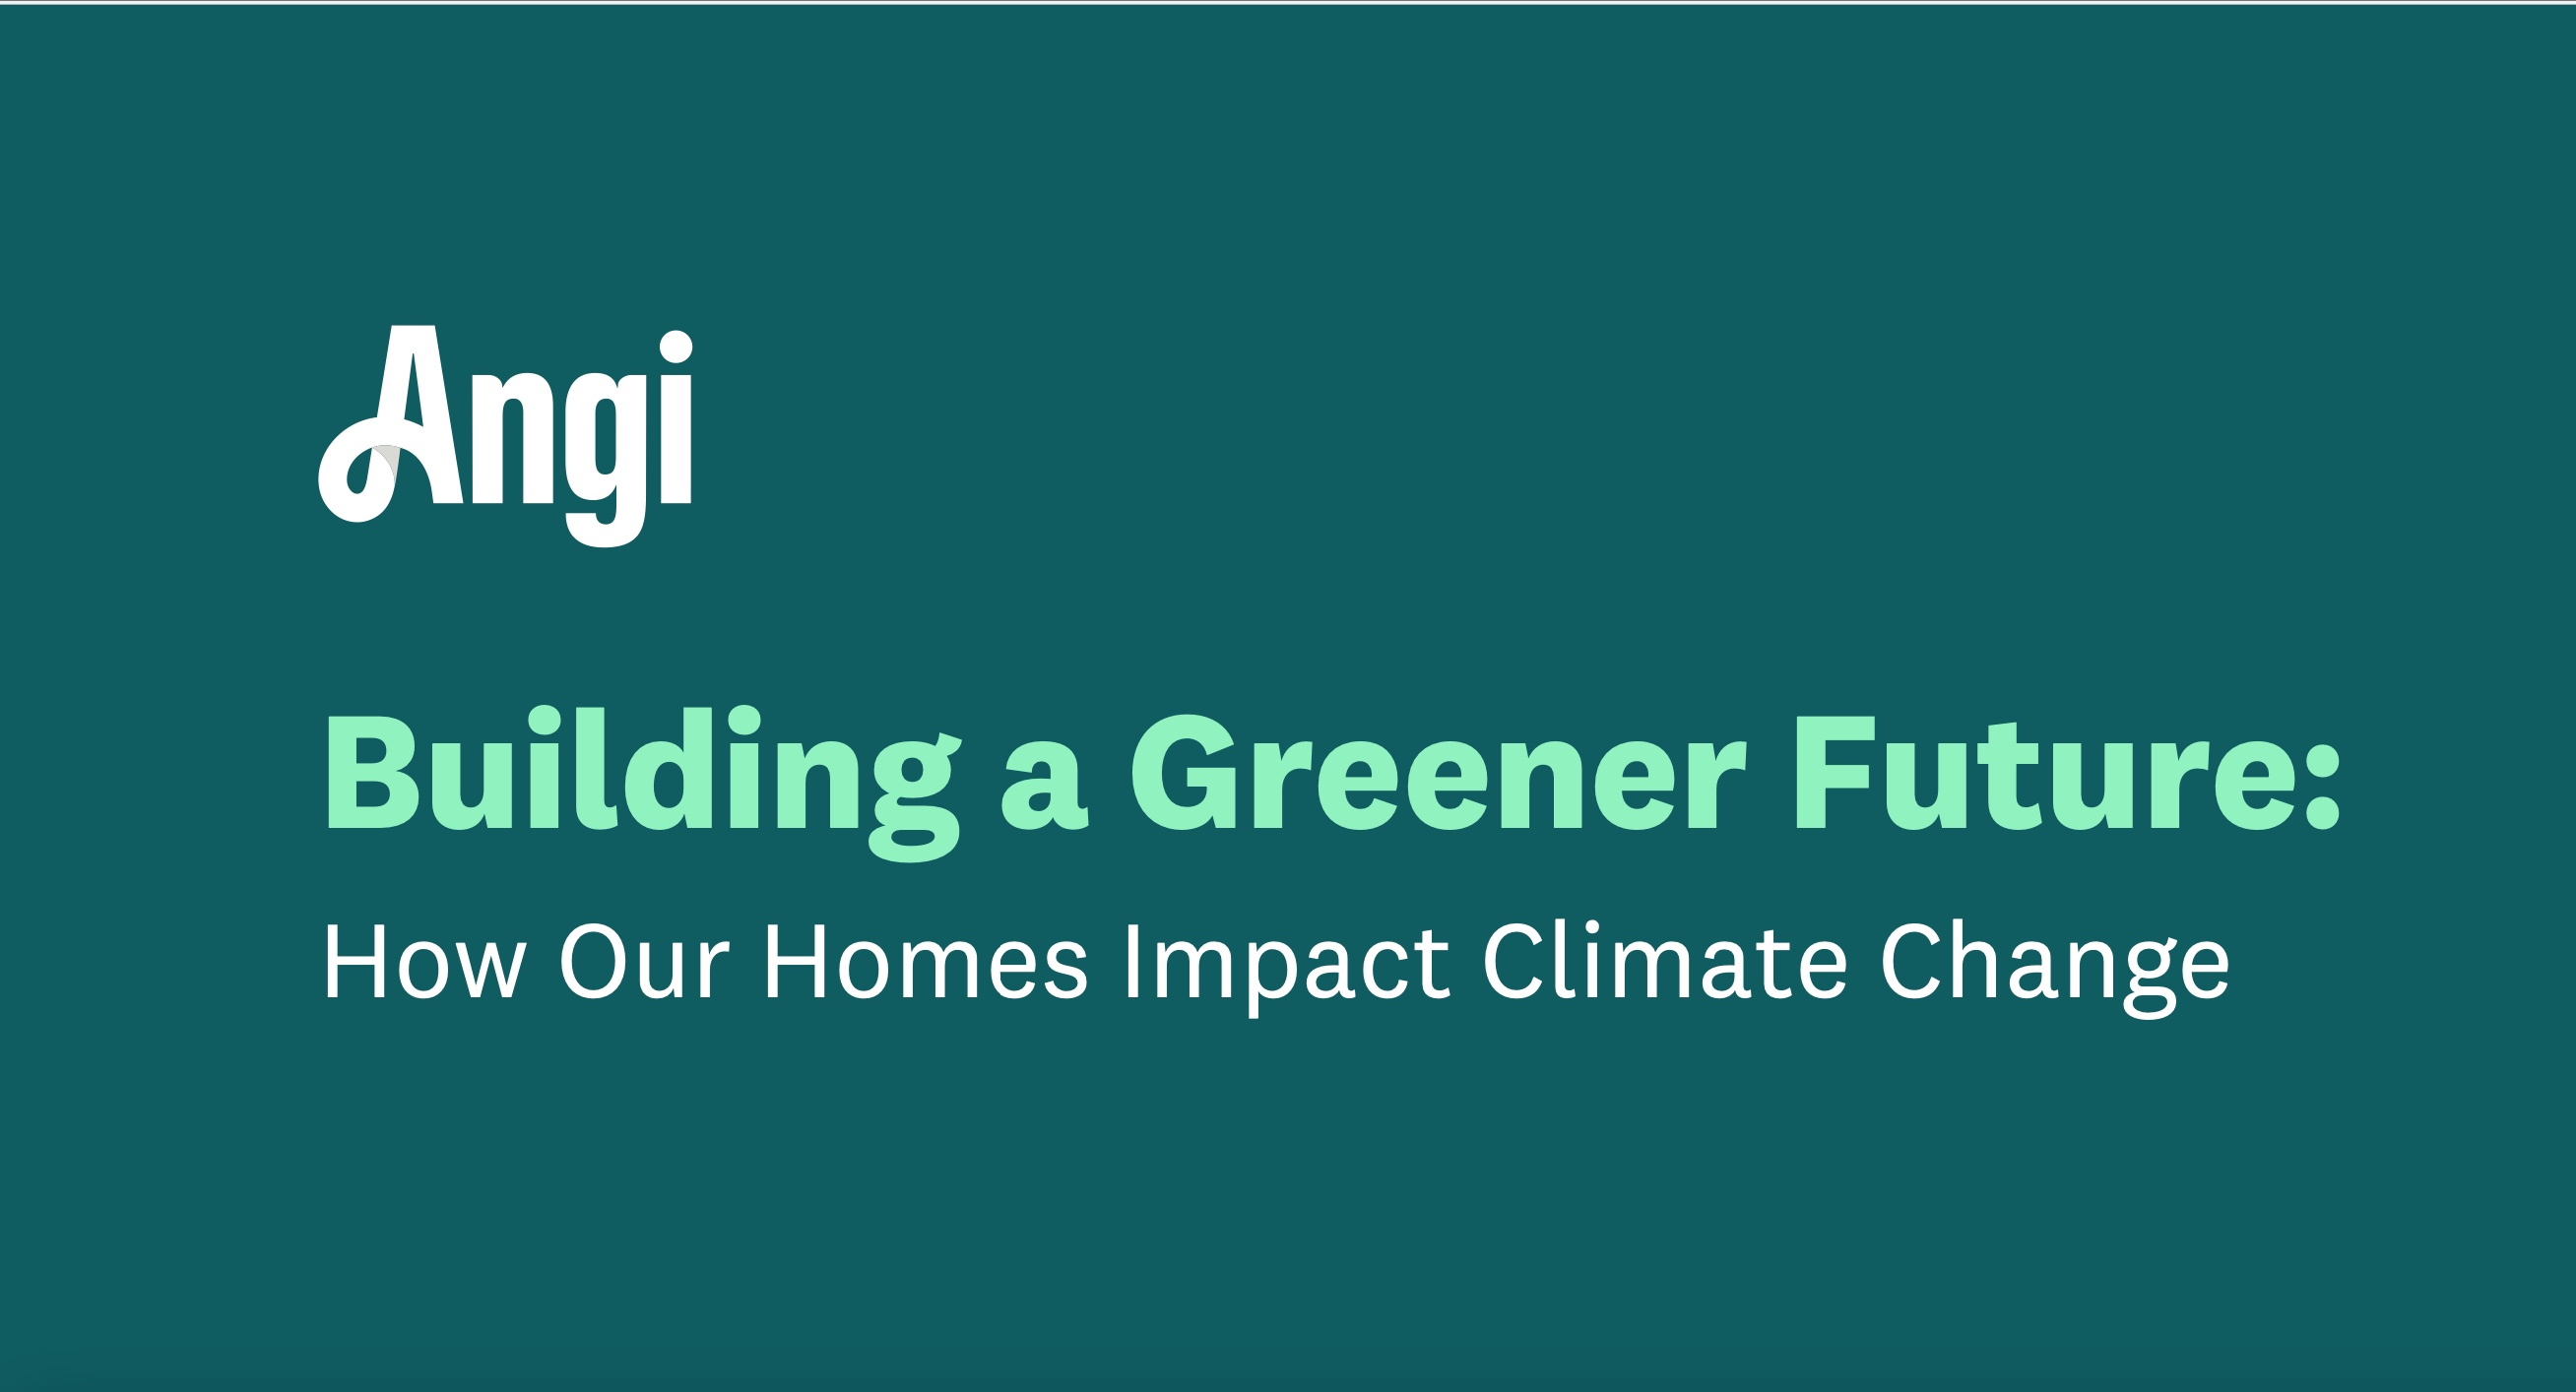 Angi: Building a Greener Future: How Our Homes Impact Climate Change